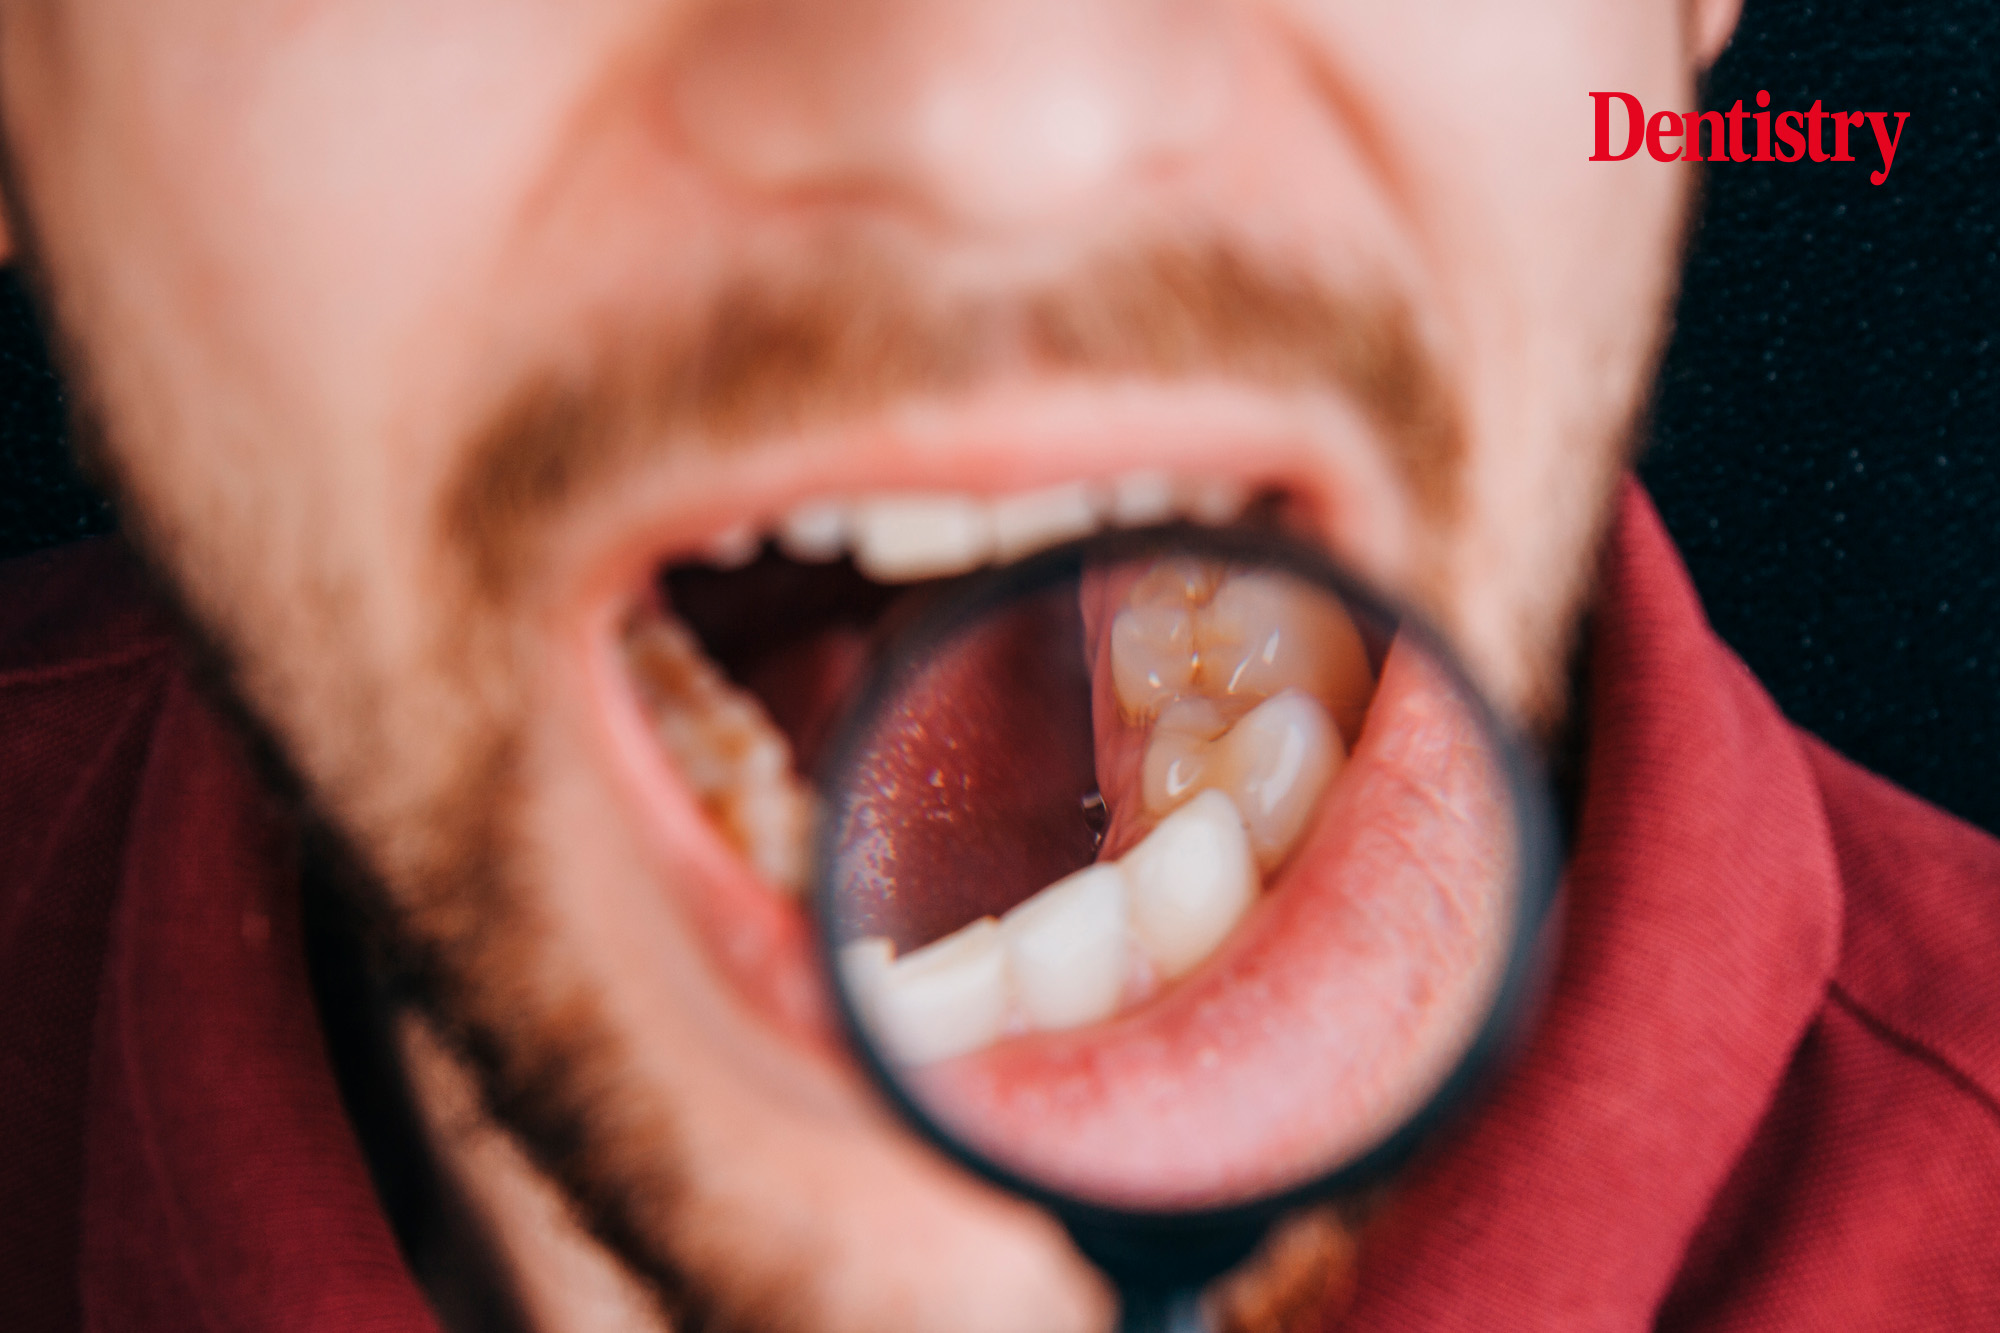 With oral cancer on the rise in the UK, Debbie Herbst discusses the importance of knowing the signs and making an early diagnosis.